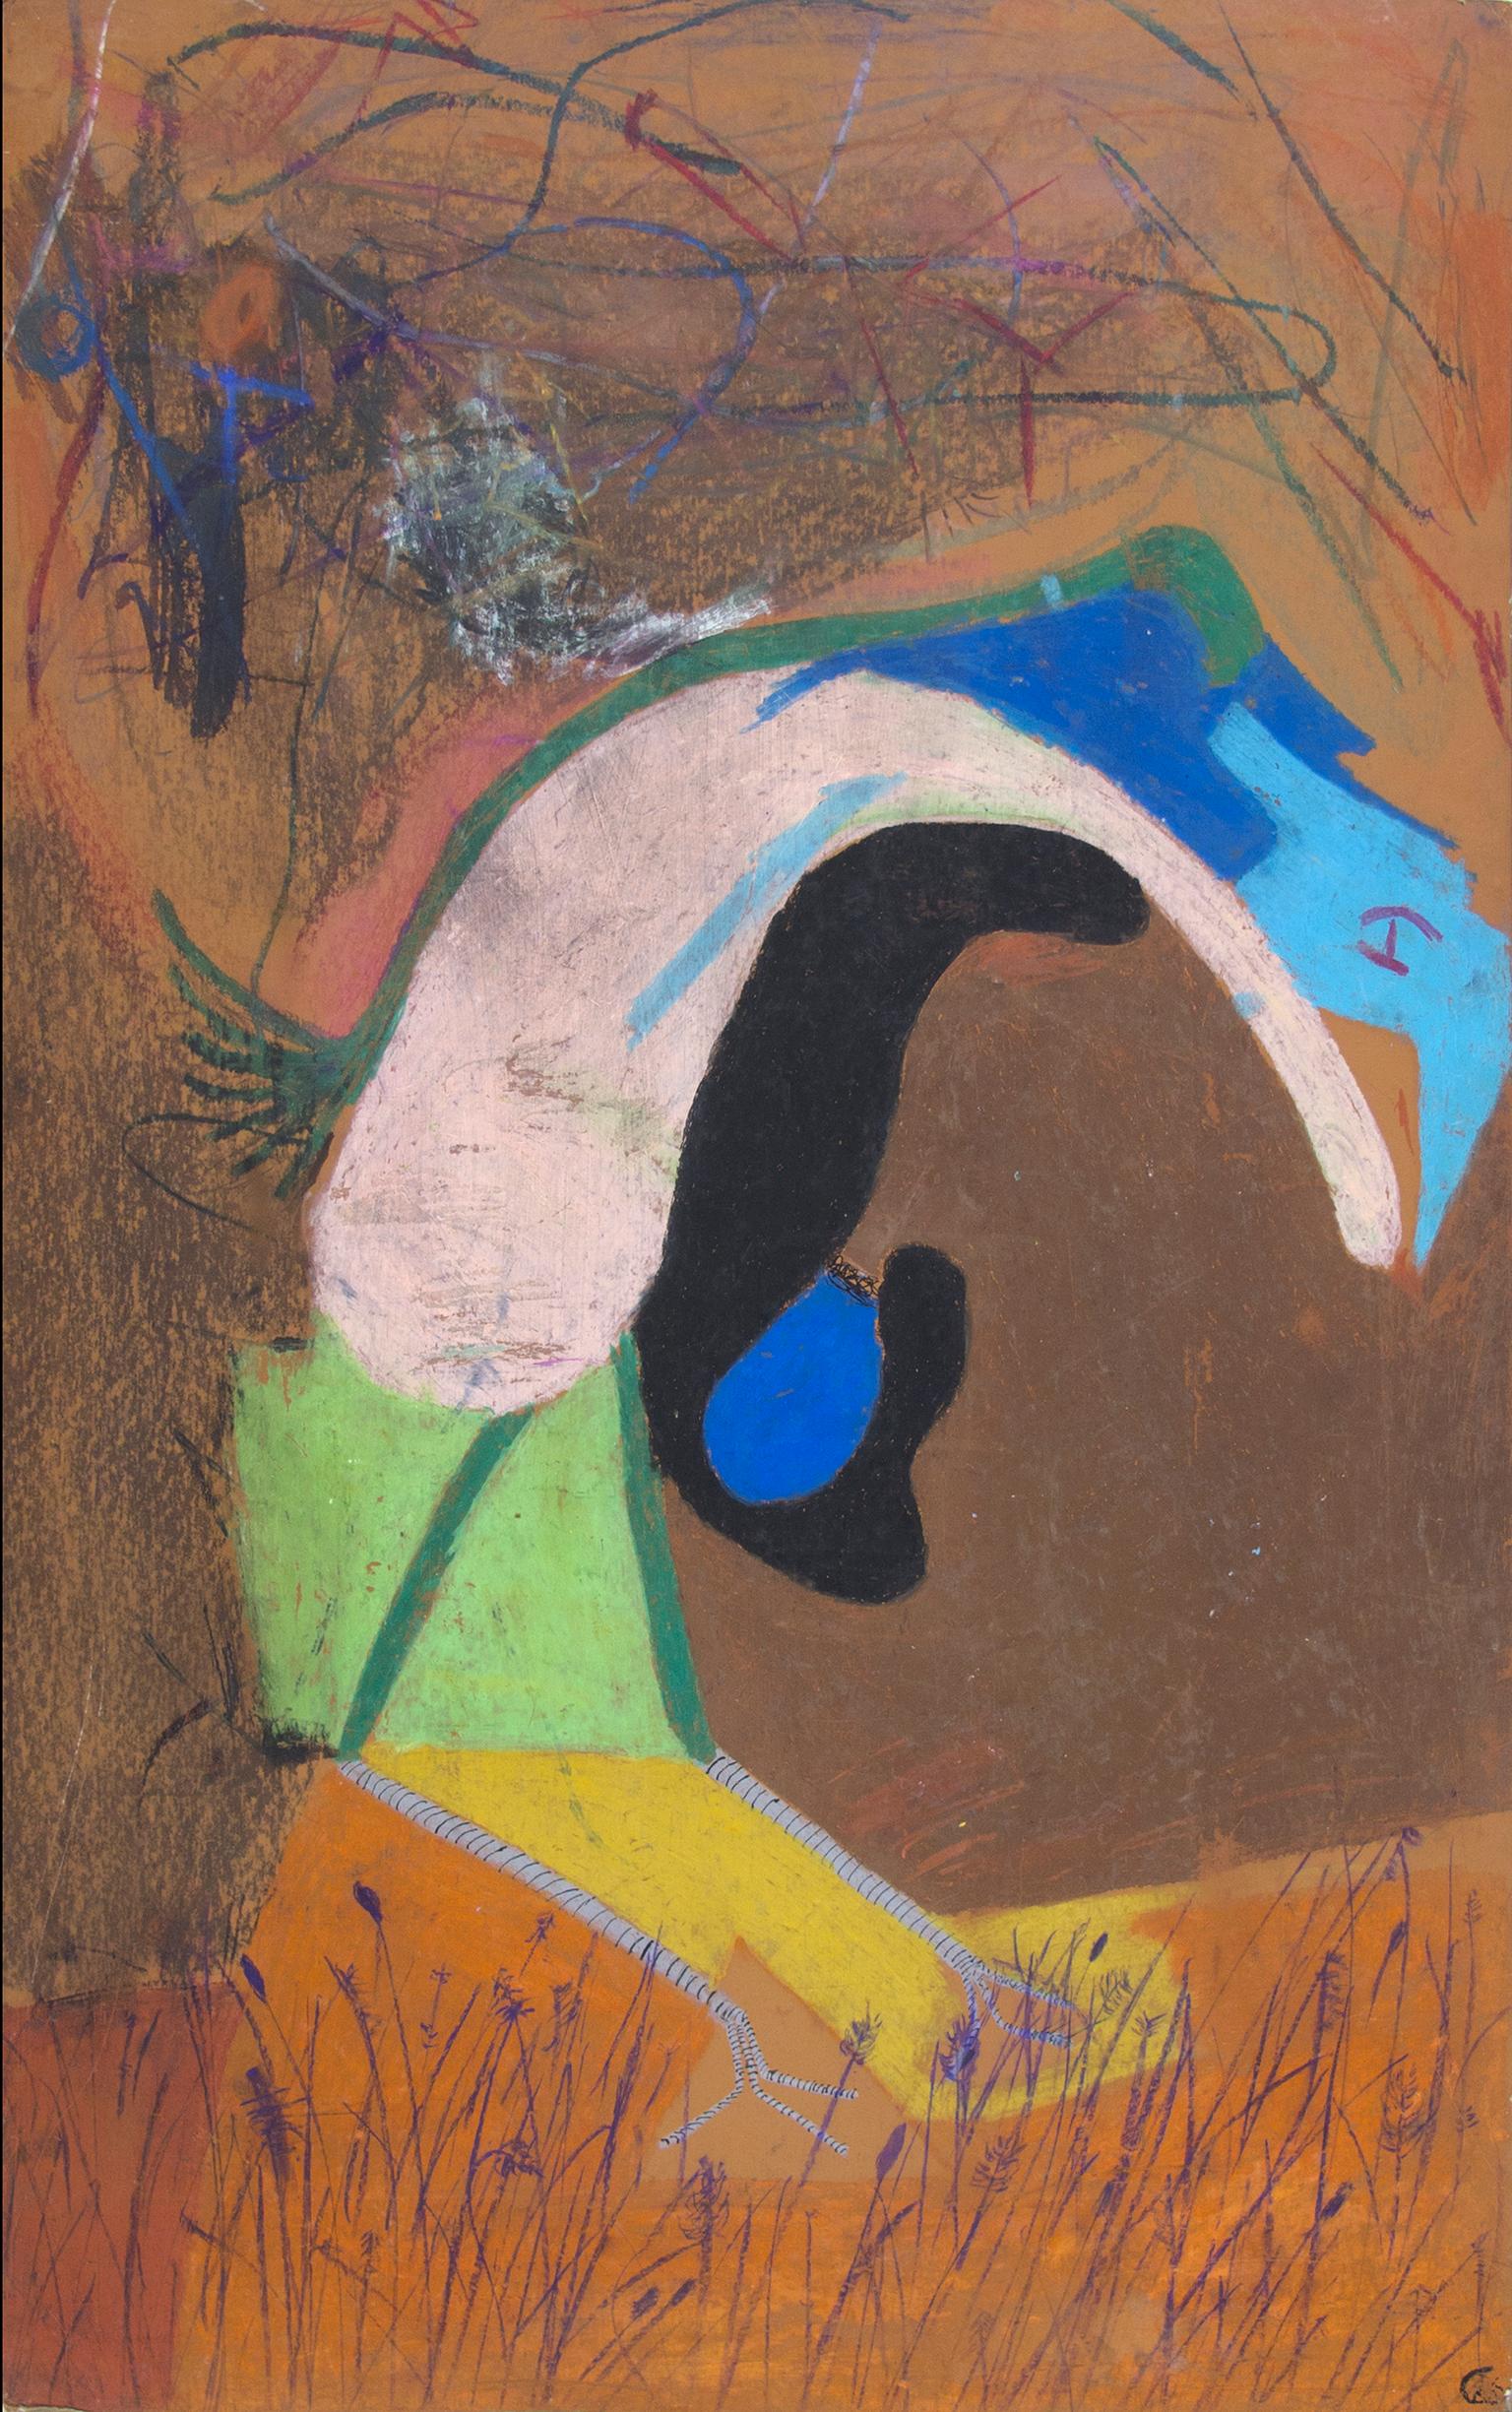 "The First Bird with Egg, Duckling Abstraction, " Oil Pastel by Reginald K. Gee